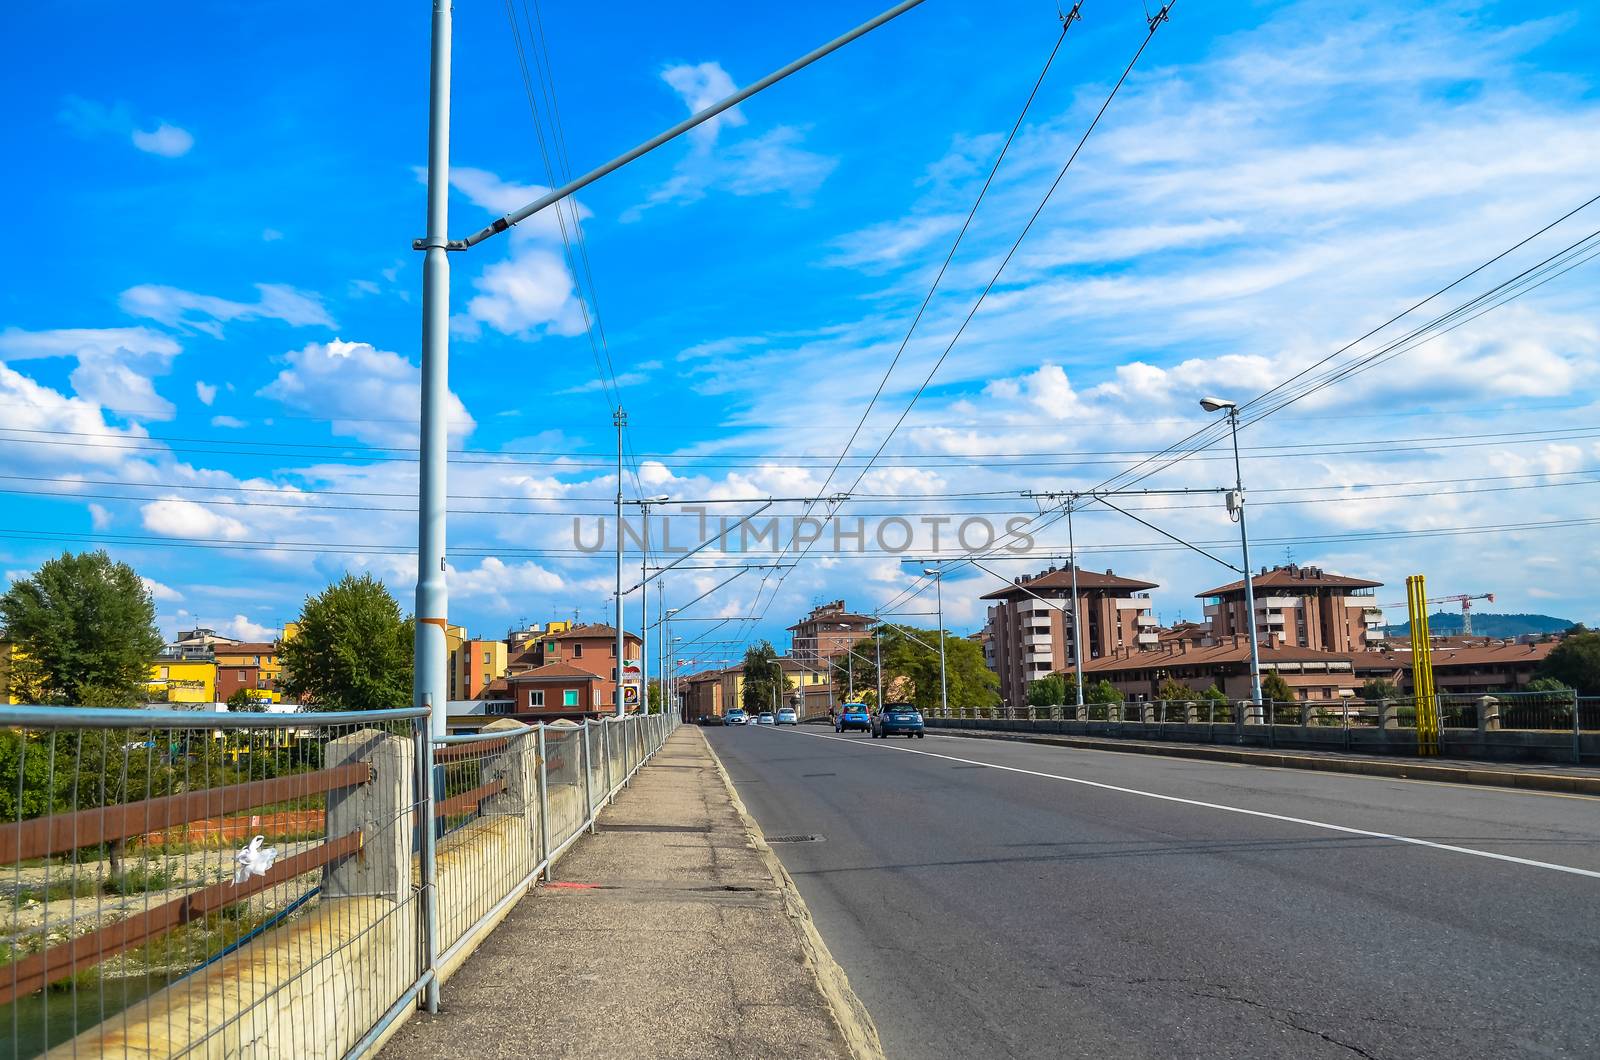 road on a bridge with houses in the background. Bologna, Italy by chernobrovin